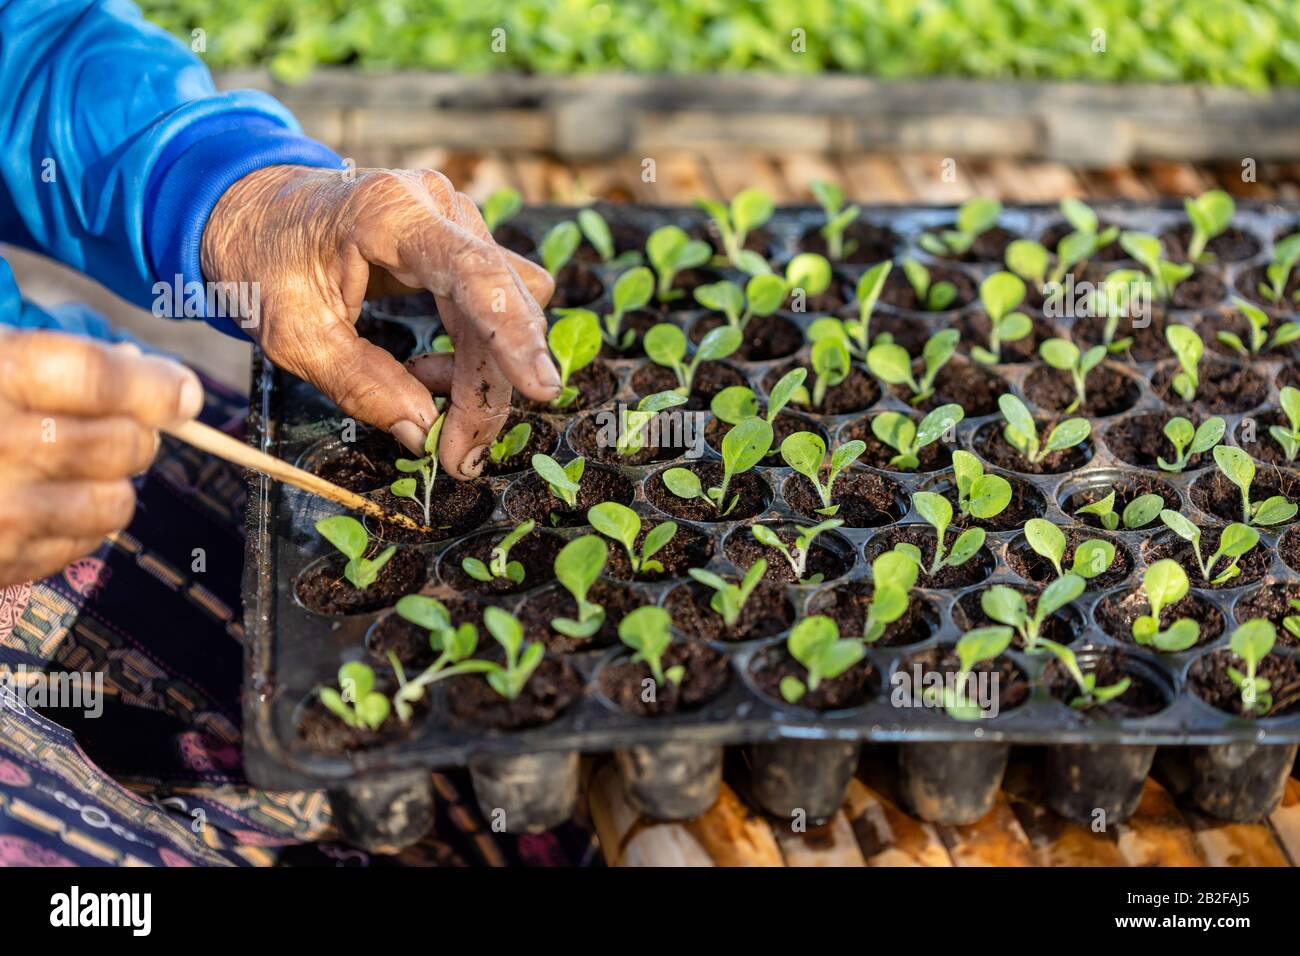 Farmer or agriculturist put the young of tobacco tree in black plastic seedling tray Stock Photo